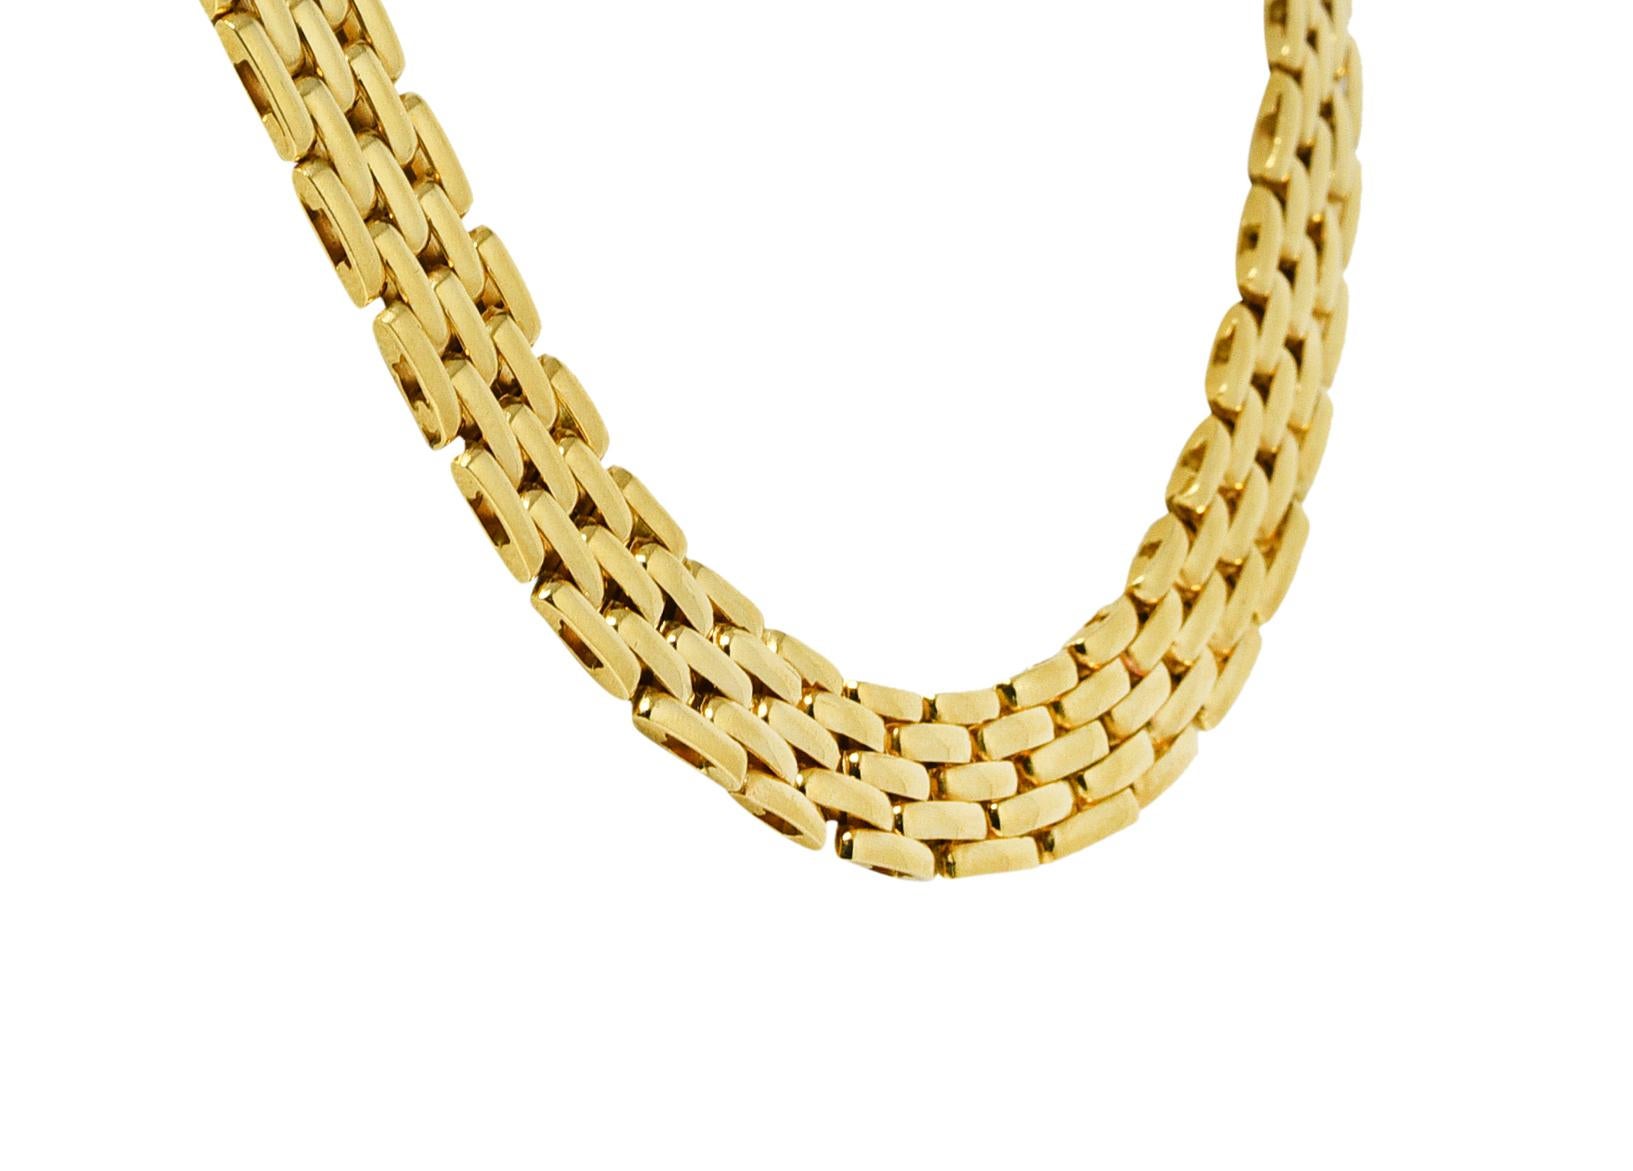 Comprised of hinged mesh-like panther style links. With high polished gold finish. Completed by hidden clasp closure with figure eight safety. Stamped 18K with Italian assay marks for 18 karat gold. Circa: Late 20th Century. Width: 7/16 inch.